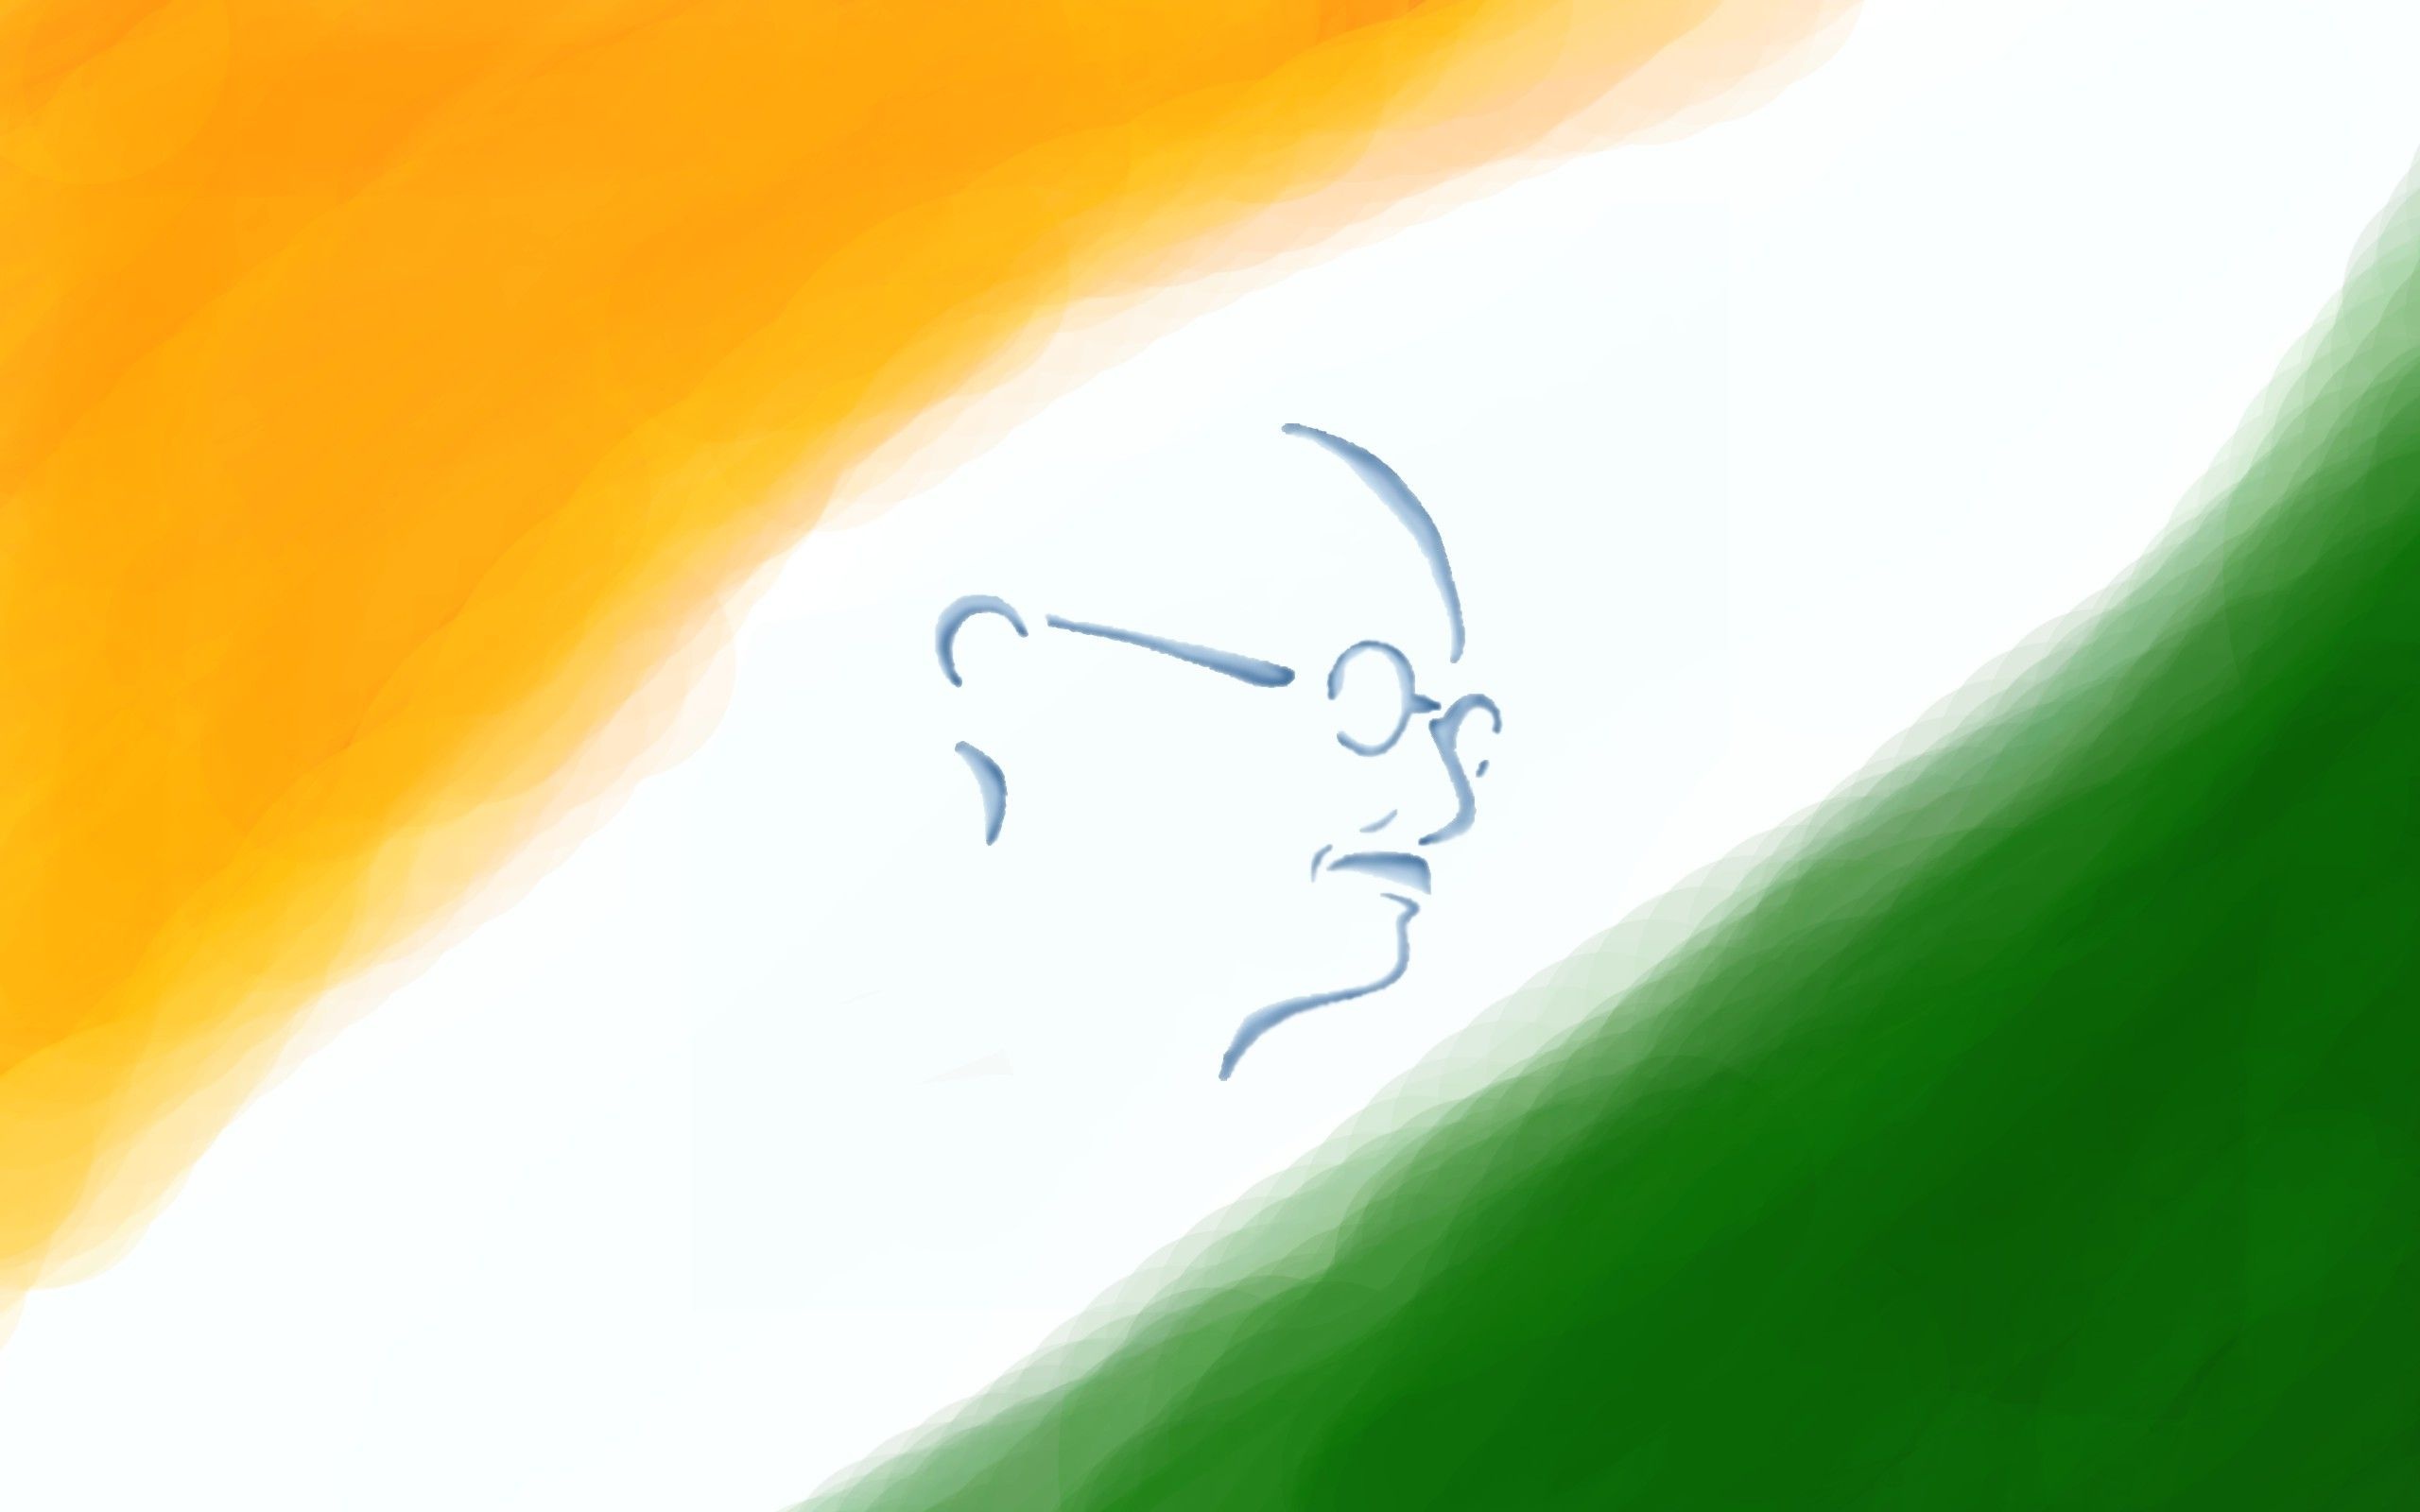 Flags of India, Symbol with Mahatma Gandhi, Indian flag wallpapers, High resolution images, 2560x1600 HD Desktop